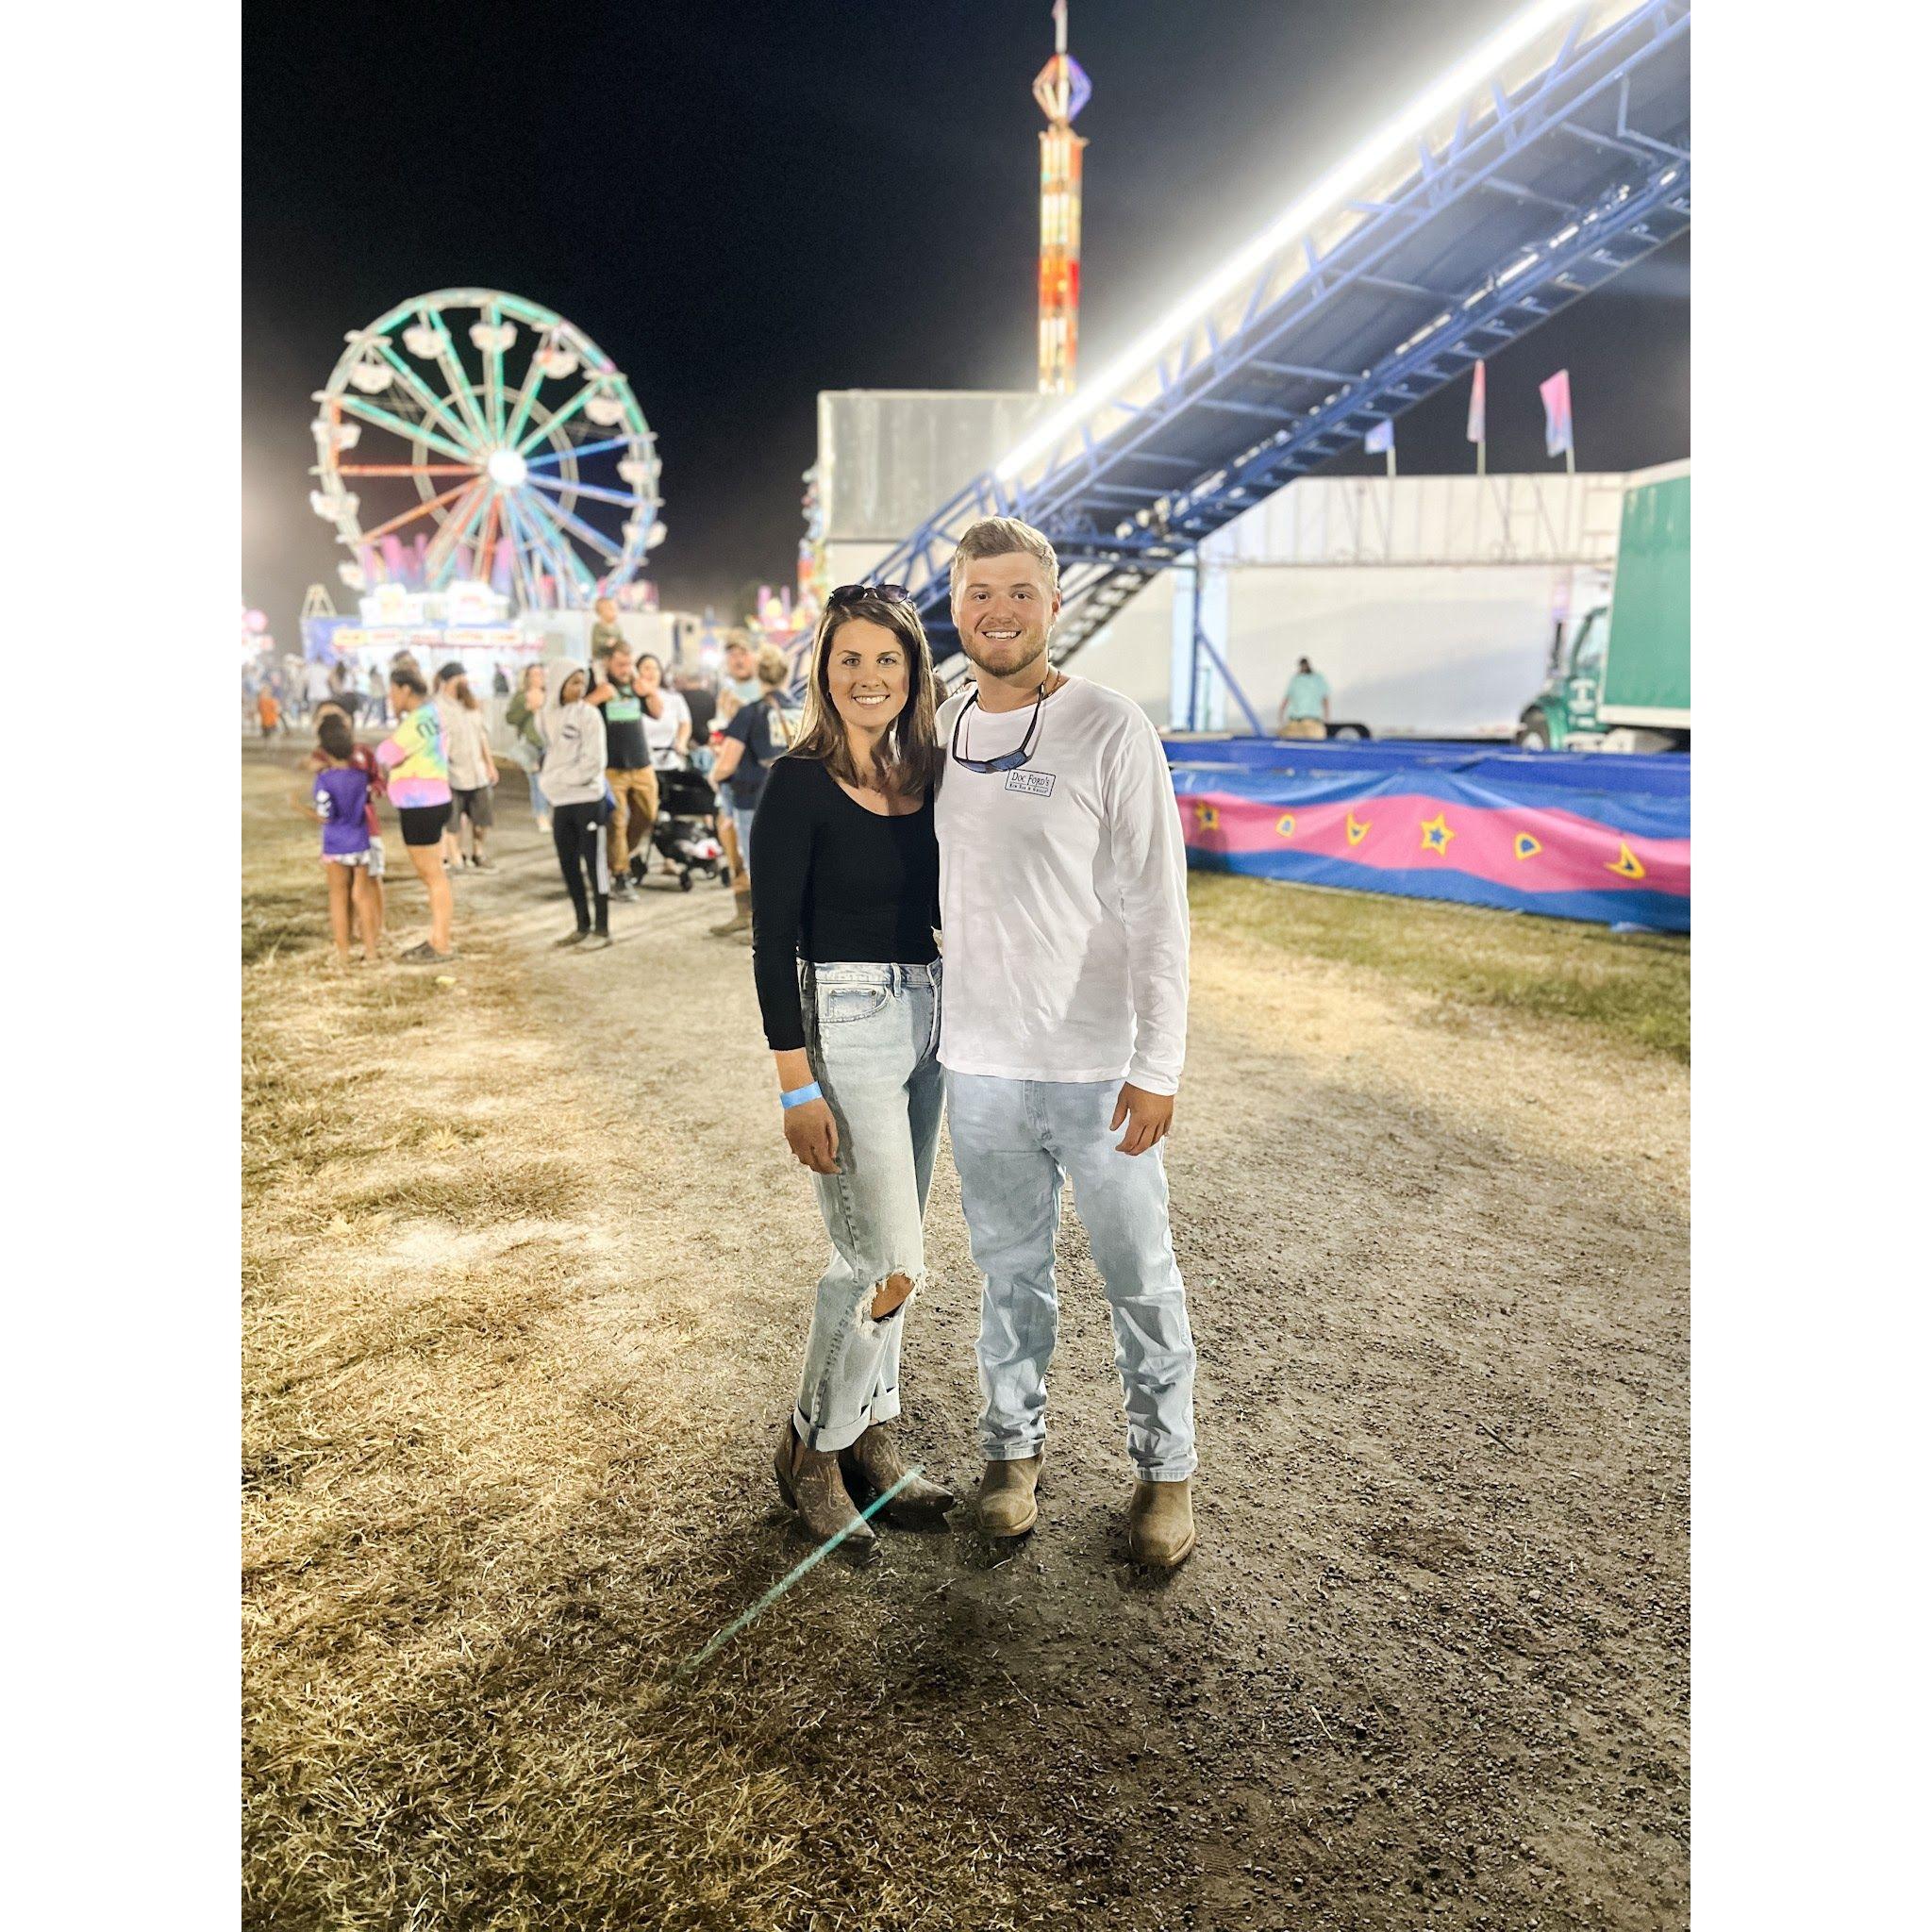 The best date of the year is always at the fair.